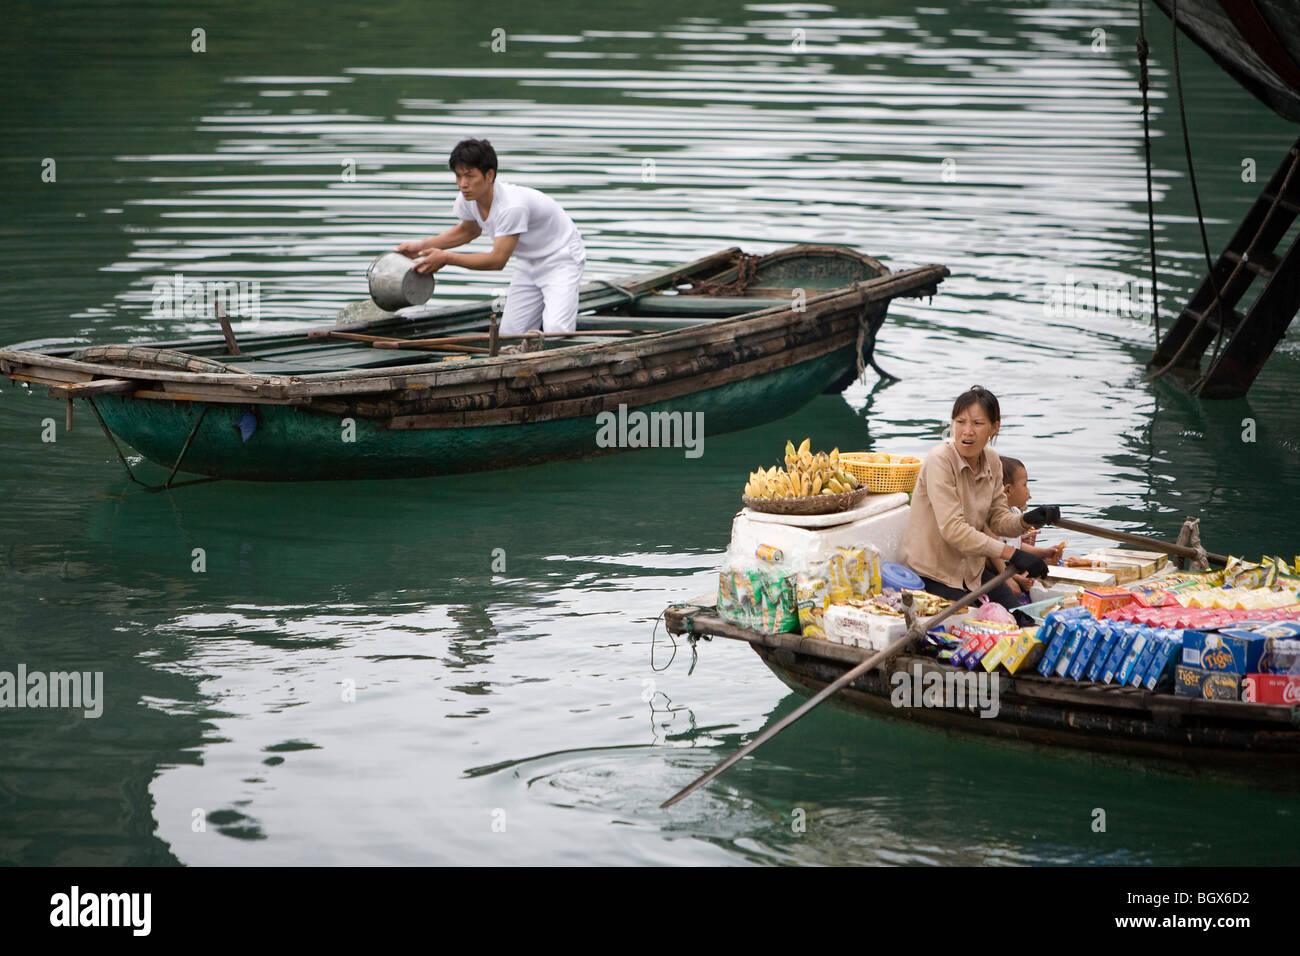 Woman with supplies in boat beside a man bailing his boat out Stock Photo